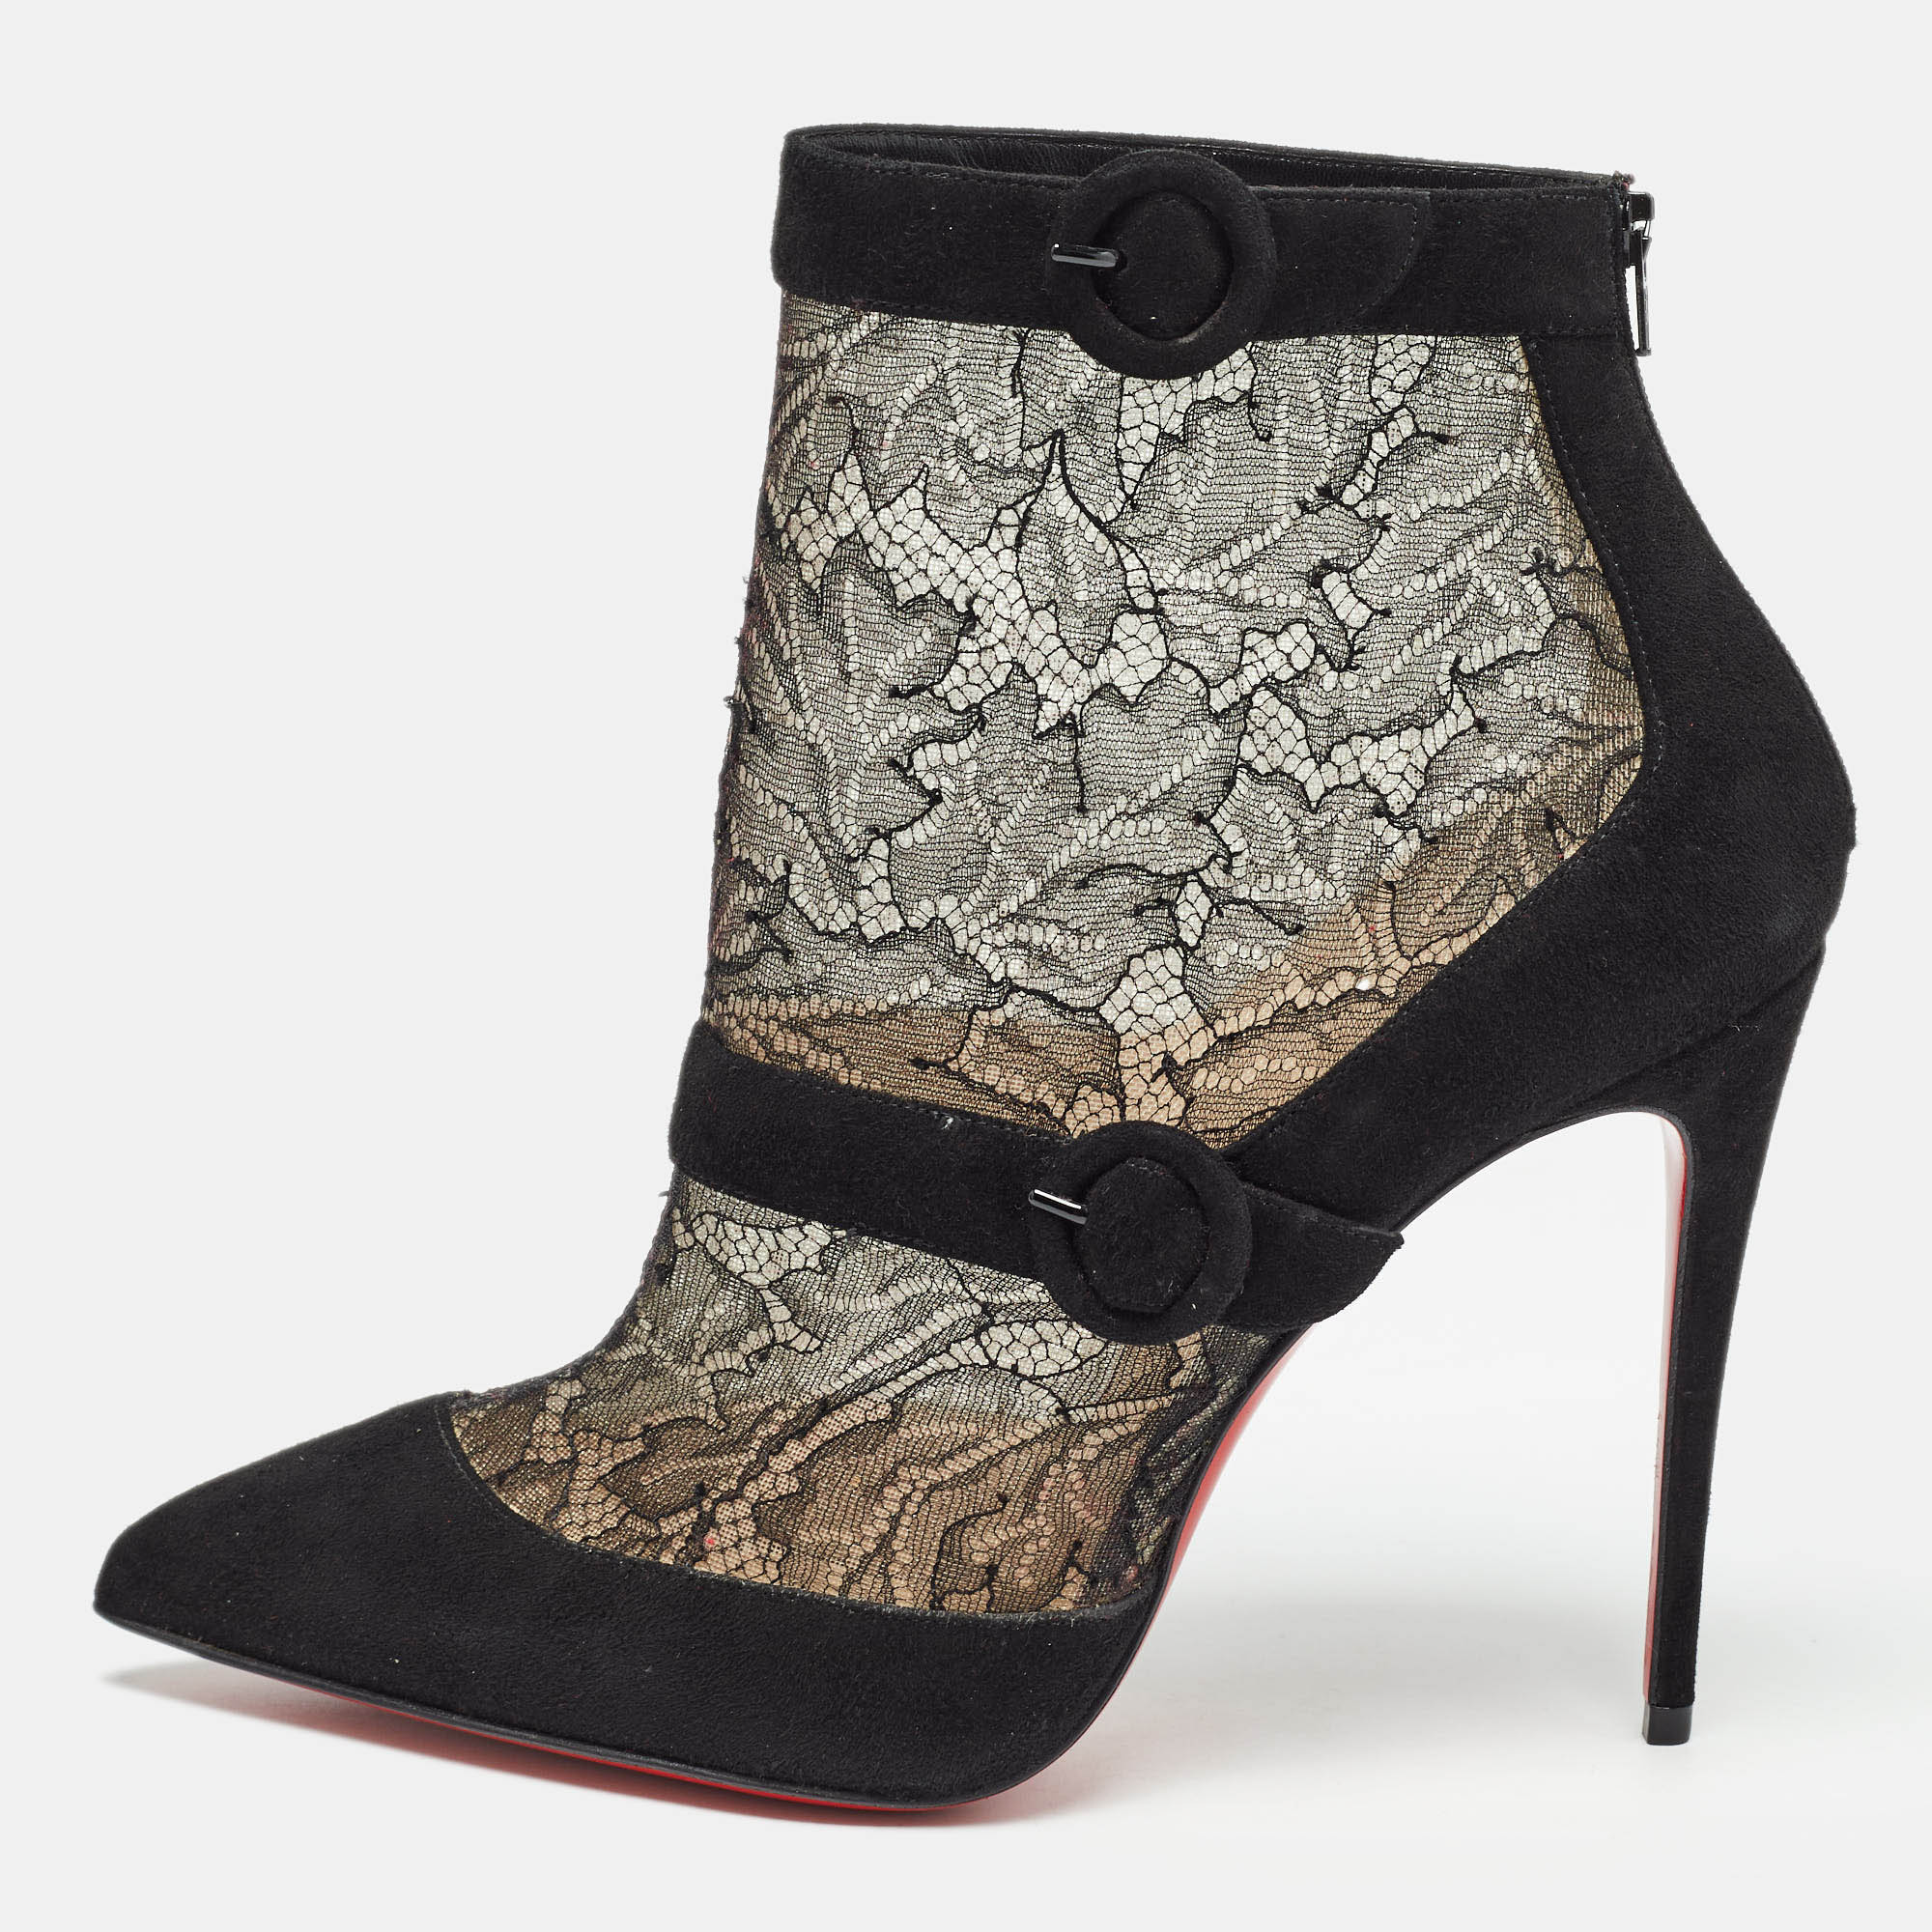 Christian louboutin black suede and lace boteboot booties size 39.5